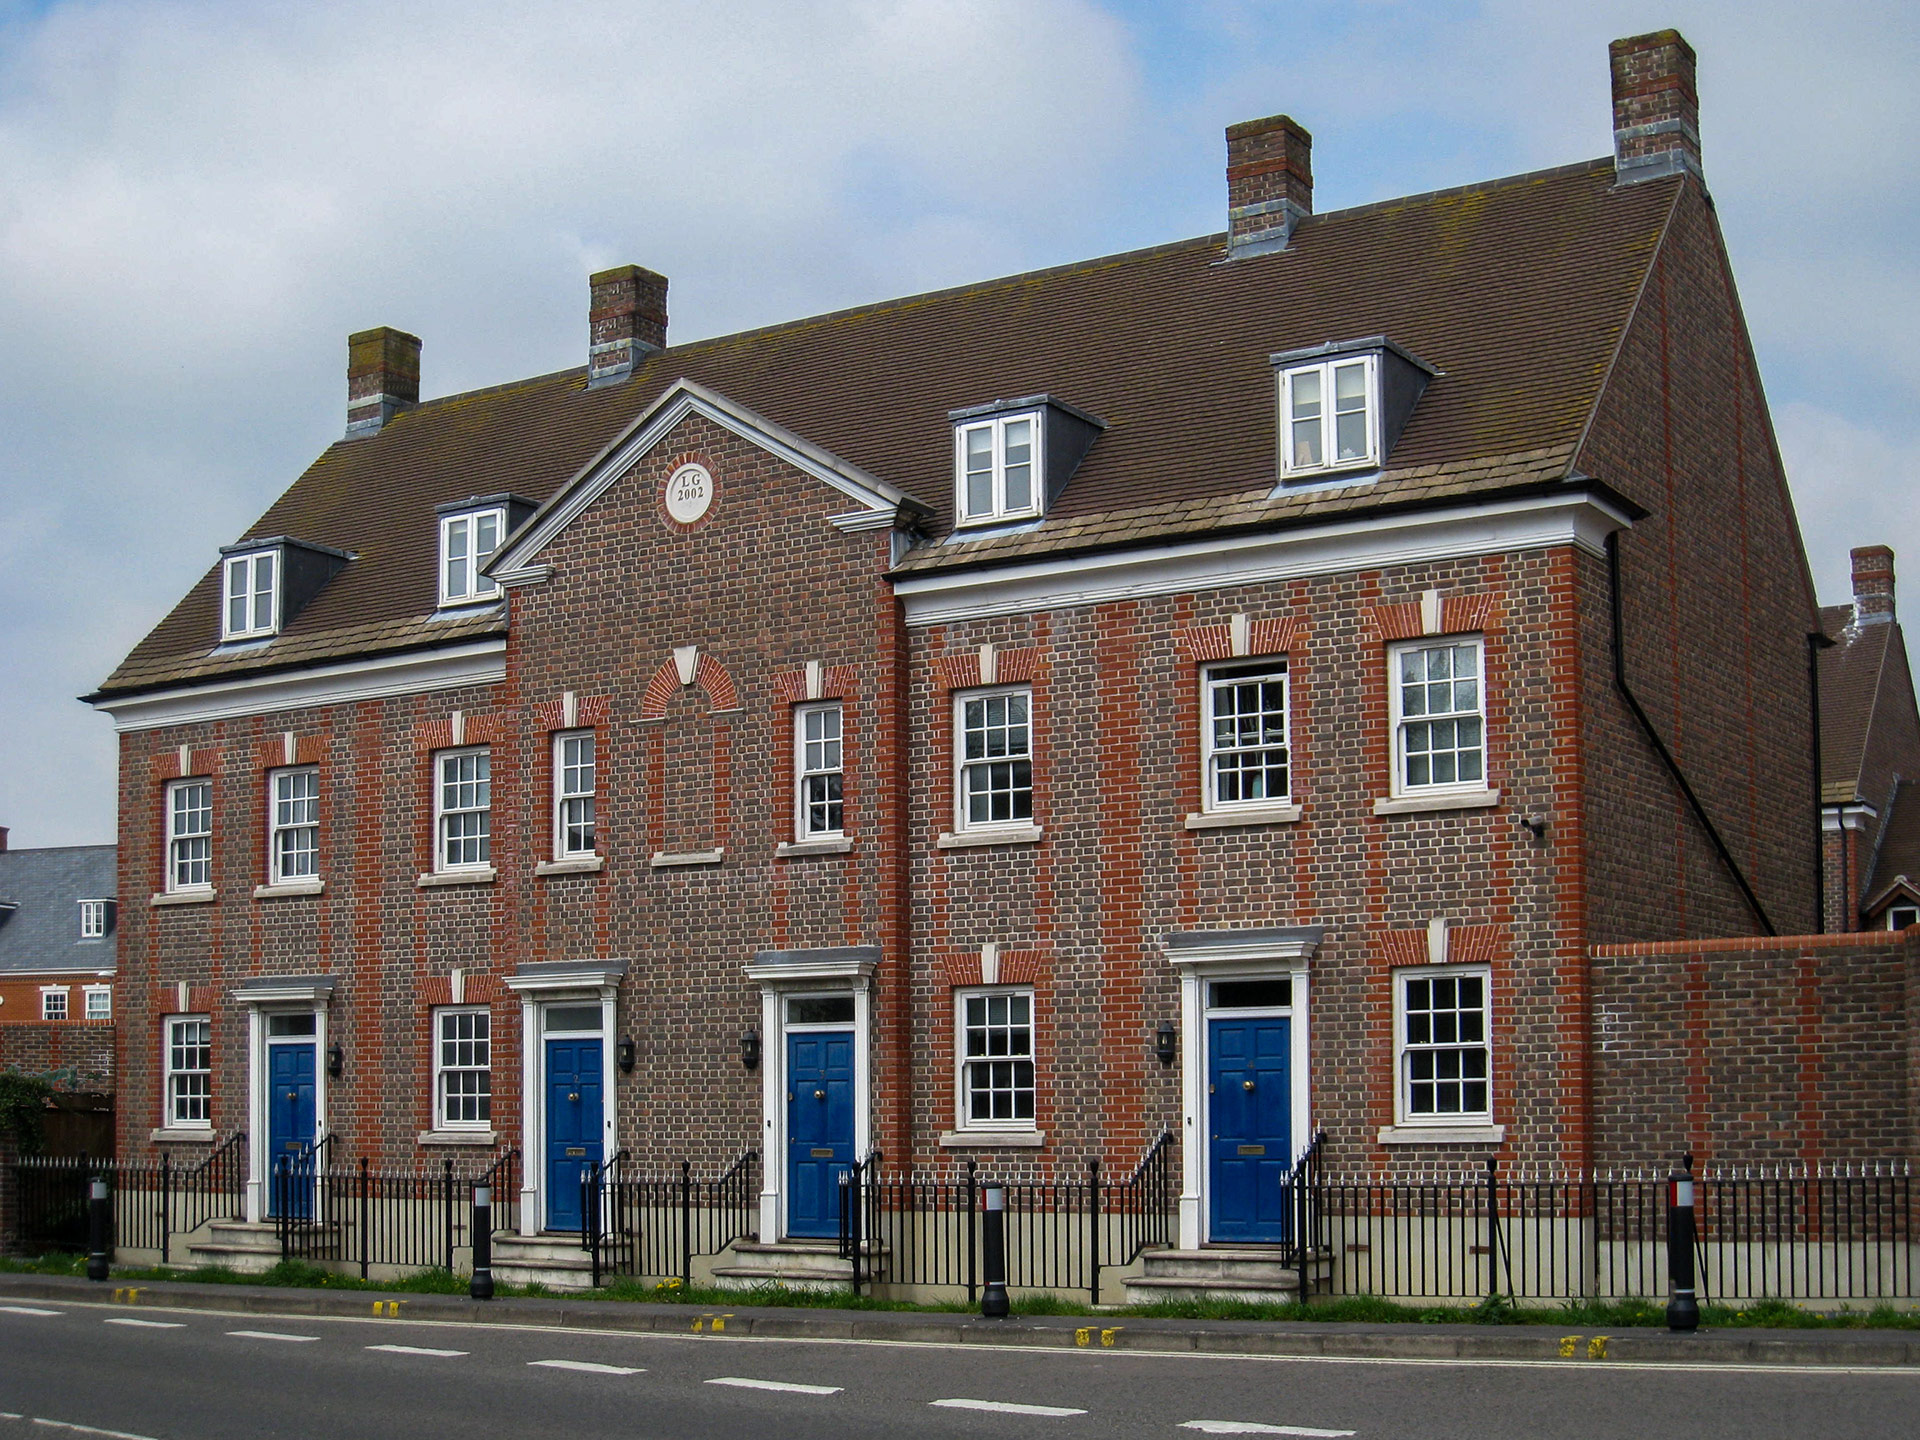 front view of terraced red brick houses from across road